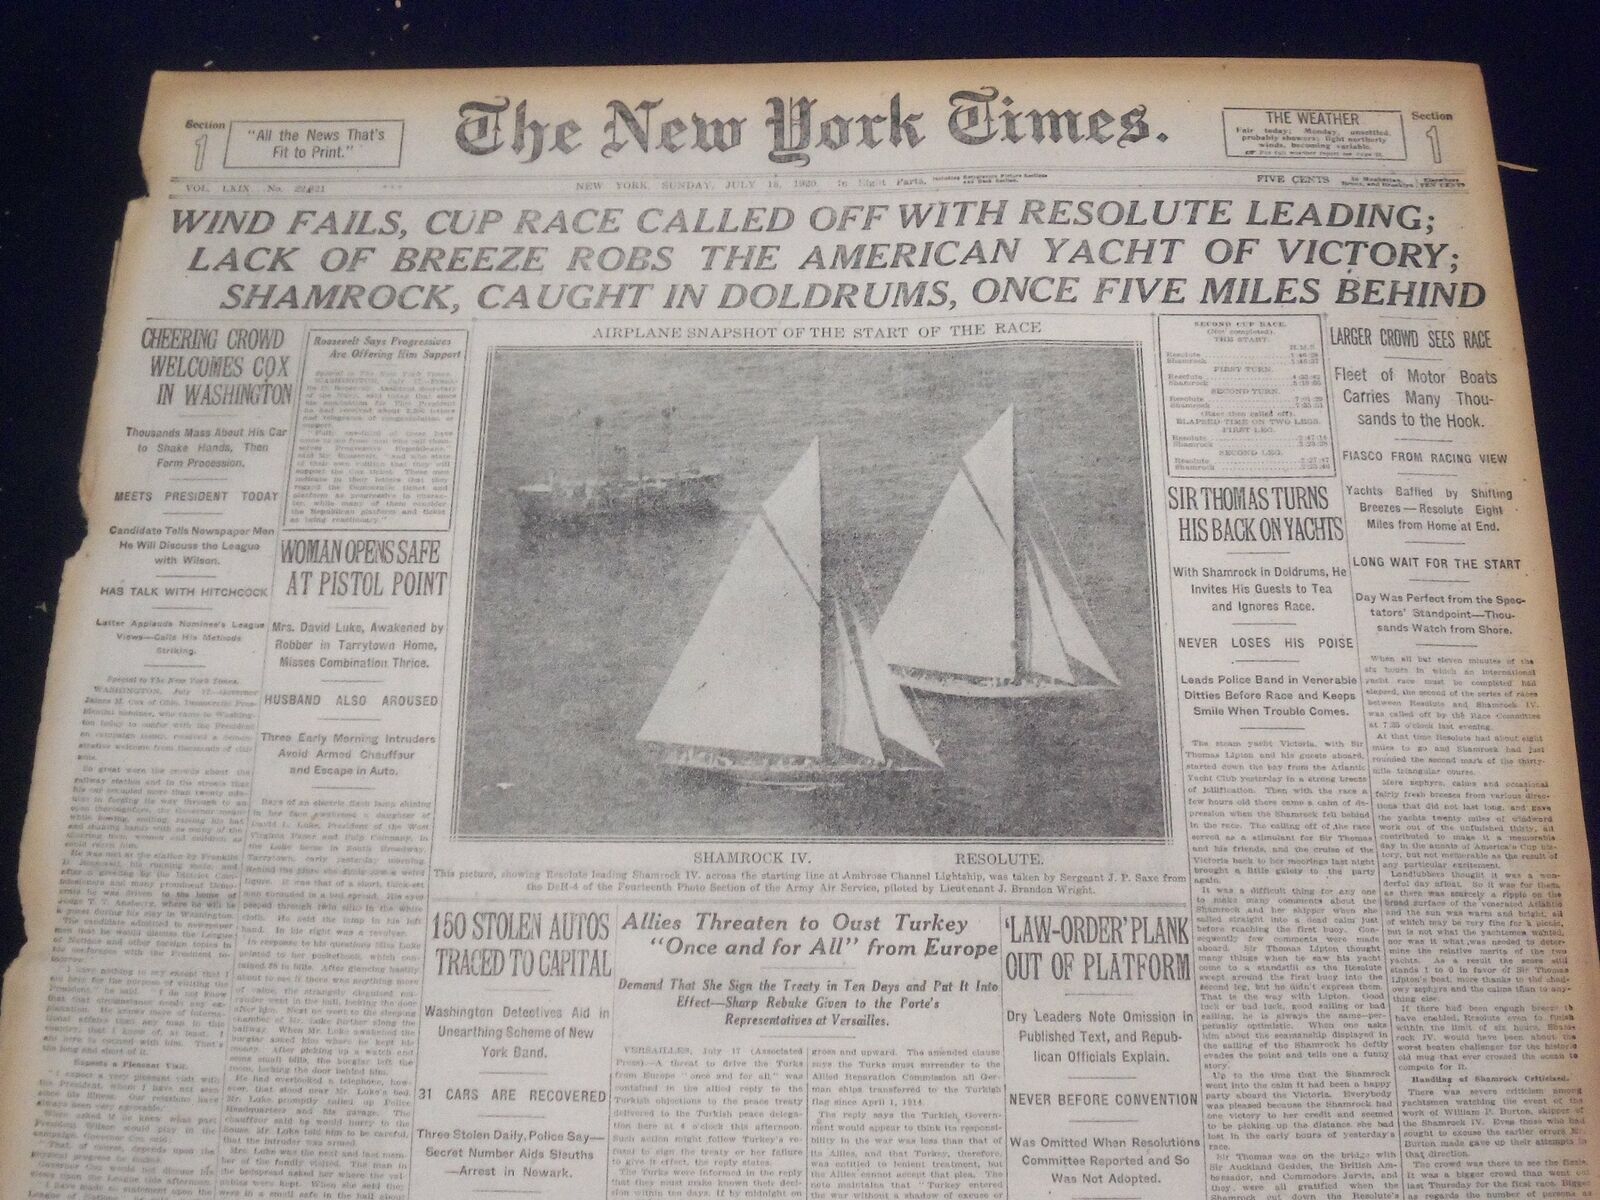 1920 JULY 18 NEW YORK TIMES - CUP RACE CALLED OFF WITH RESOLUTE WINNING- NT 9345